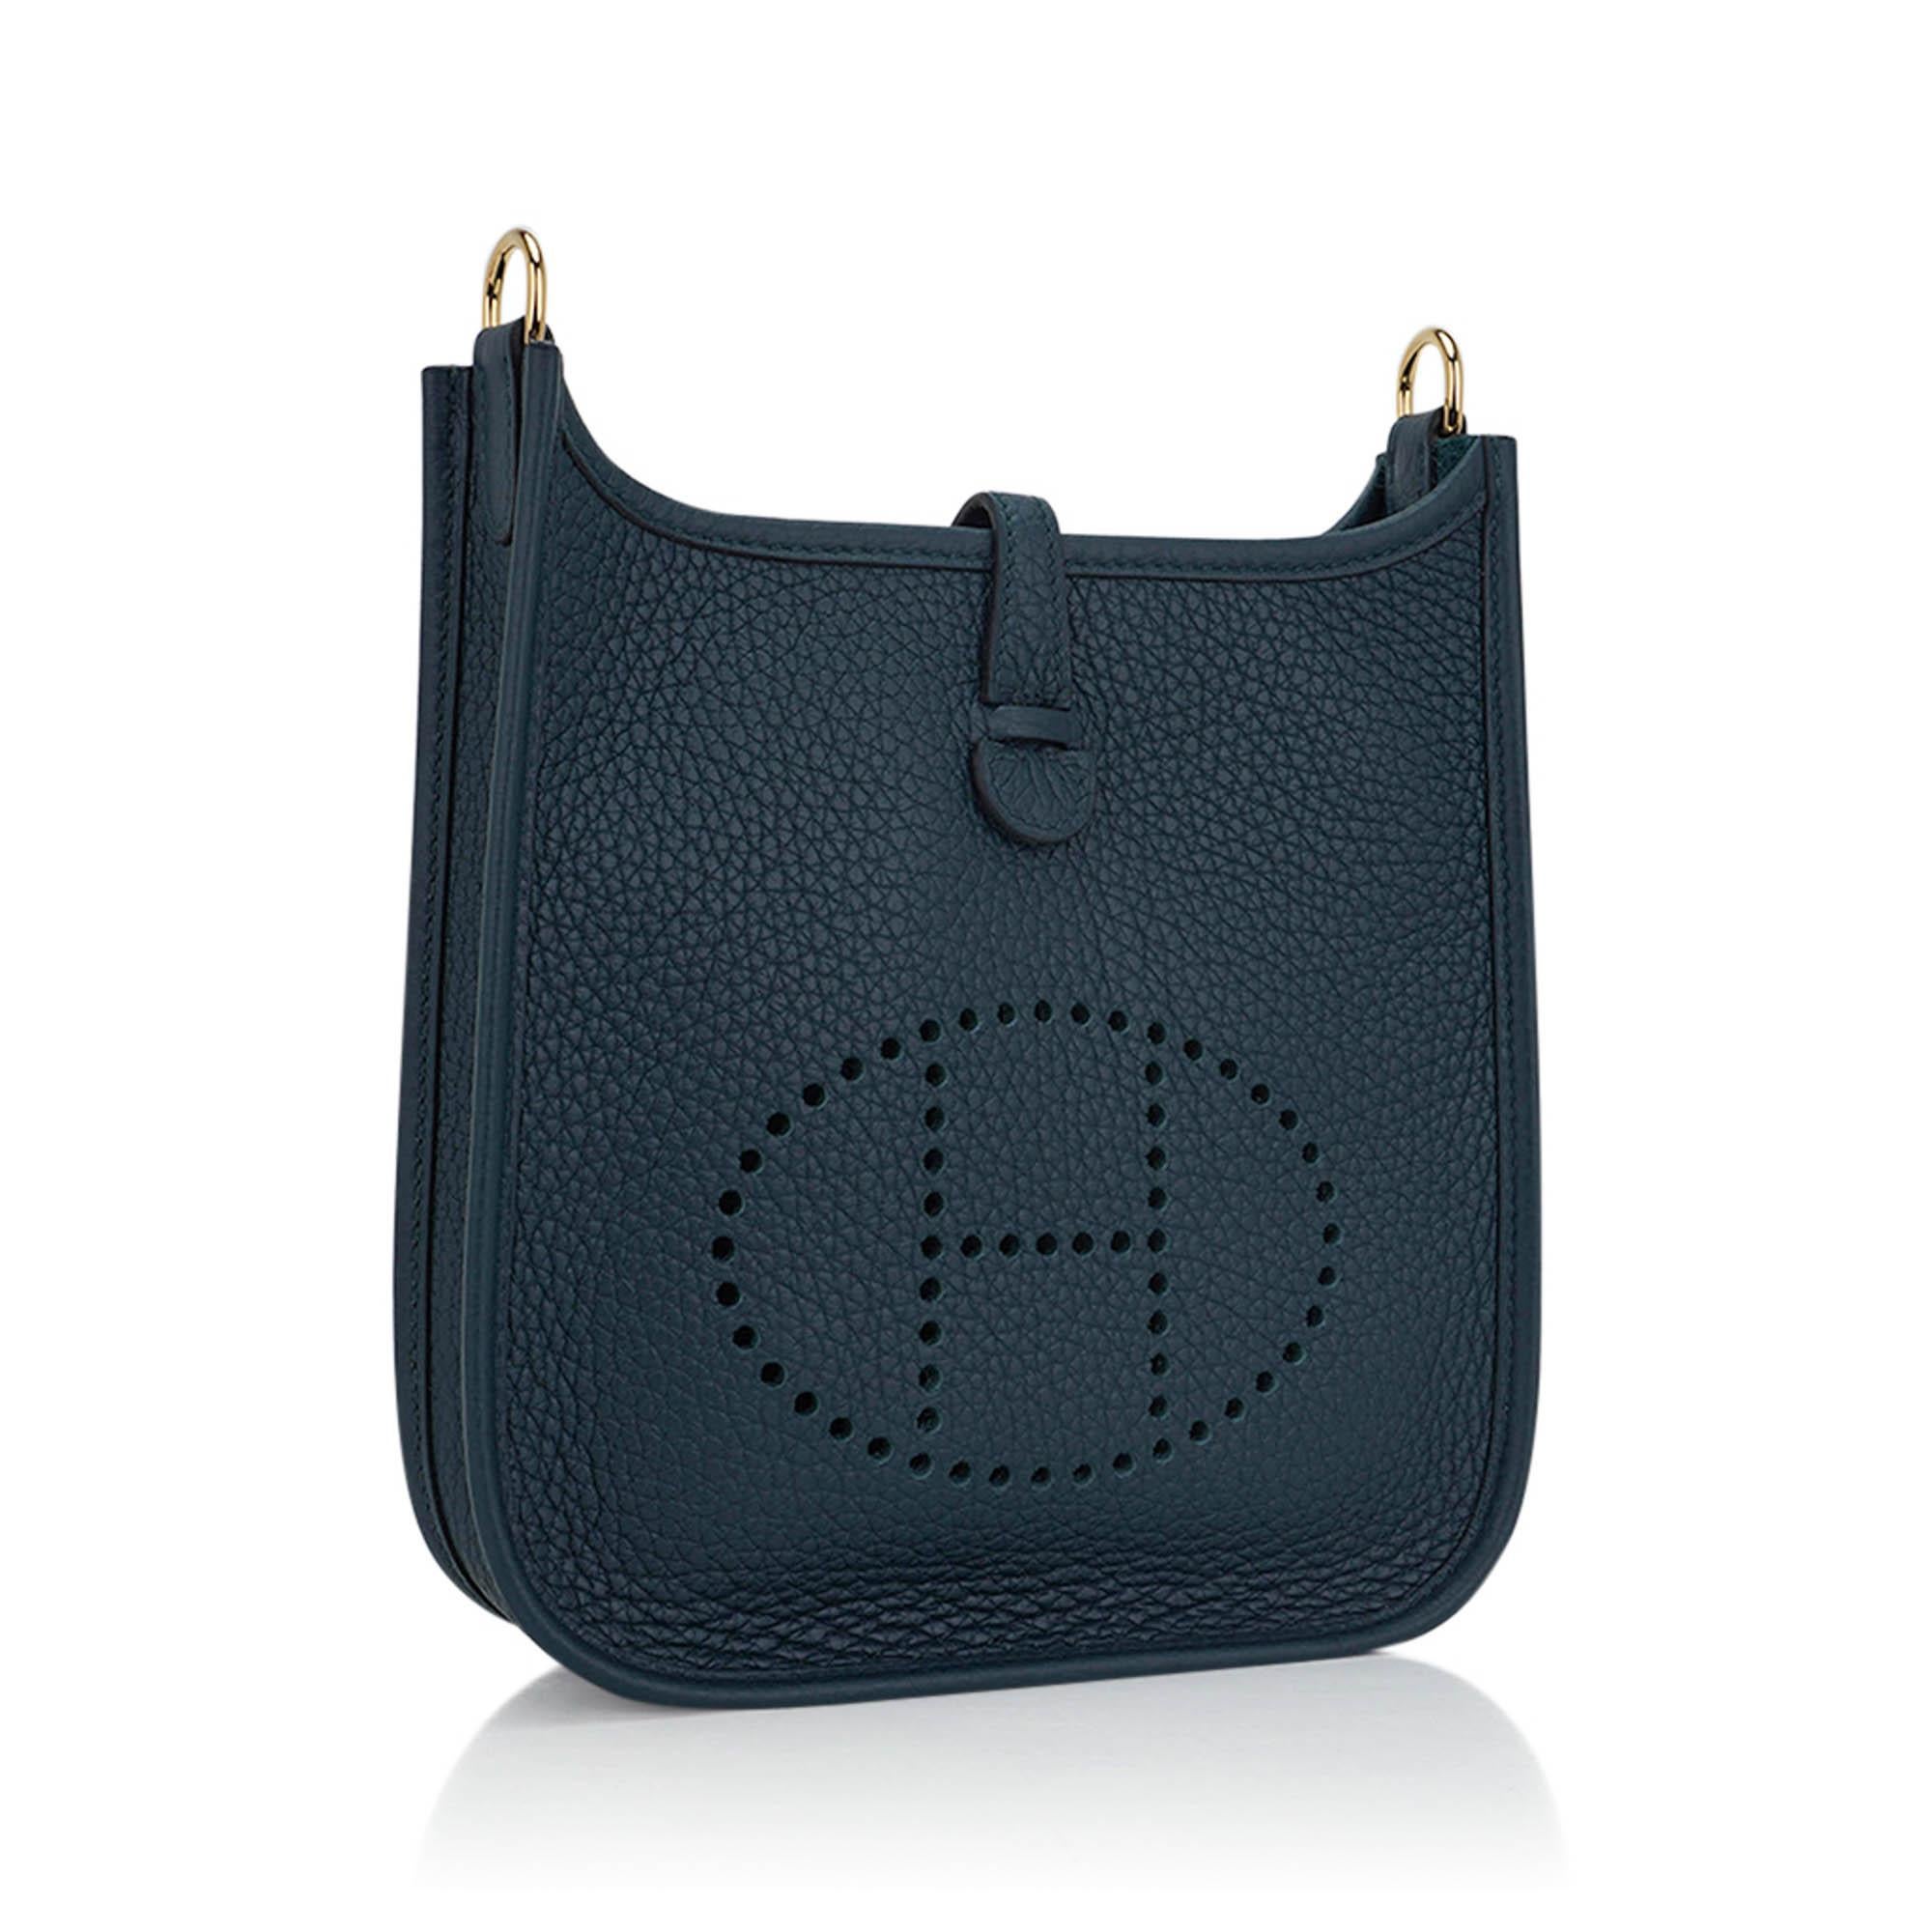 Mightychic offers an Hermes Evelyne TPM featured in gorgeous Vert Rousseau.
Clemence leather is soft and scratch resistant.
Signature perforated H on front of bag.
Rich with Gold hardware.
Fabulous shoulder or crossbody bag.
Comes with sleepers and